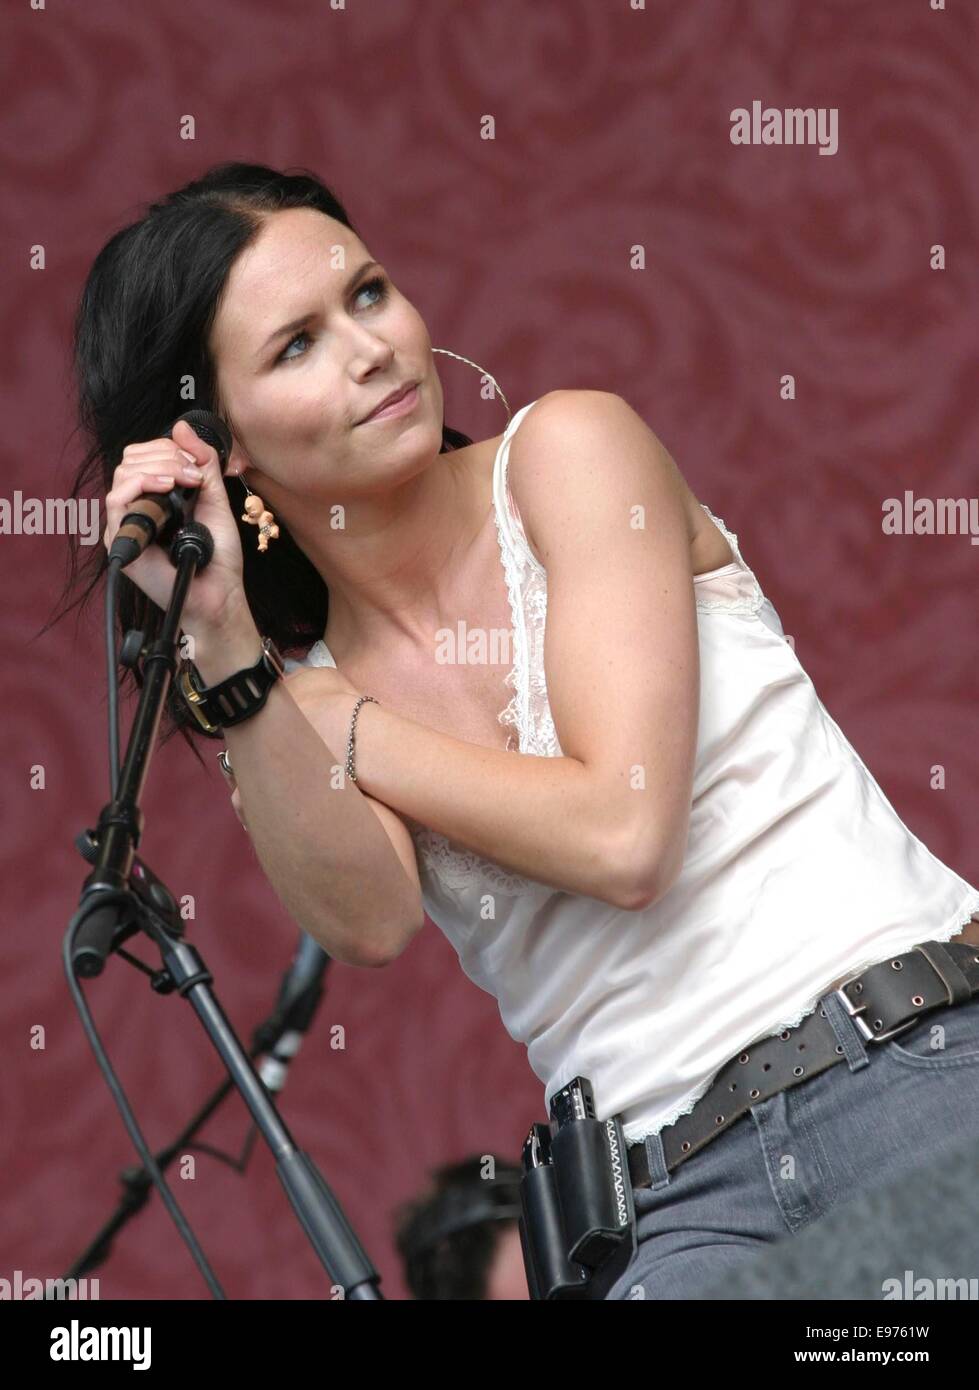 'The Cardigans', T In The Park music festival, Balado, Scotland, 2003. Stock Photo